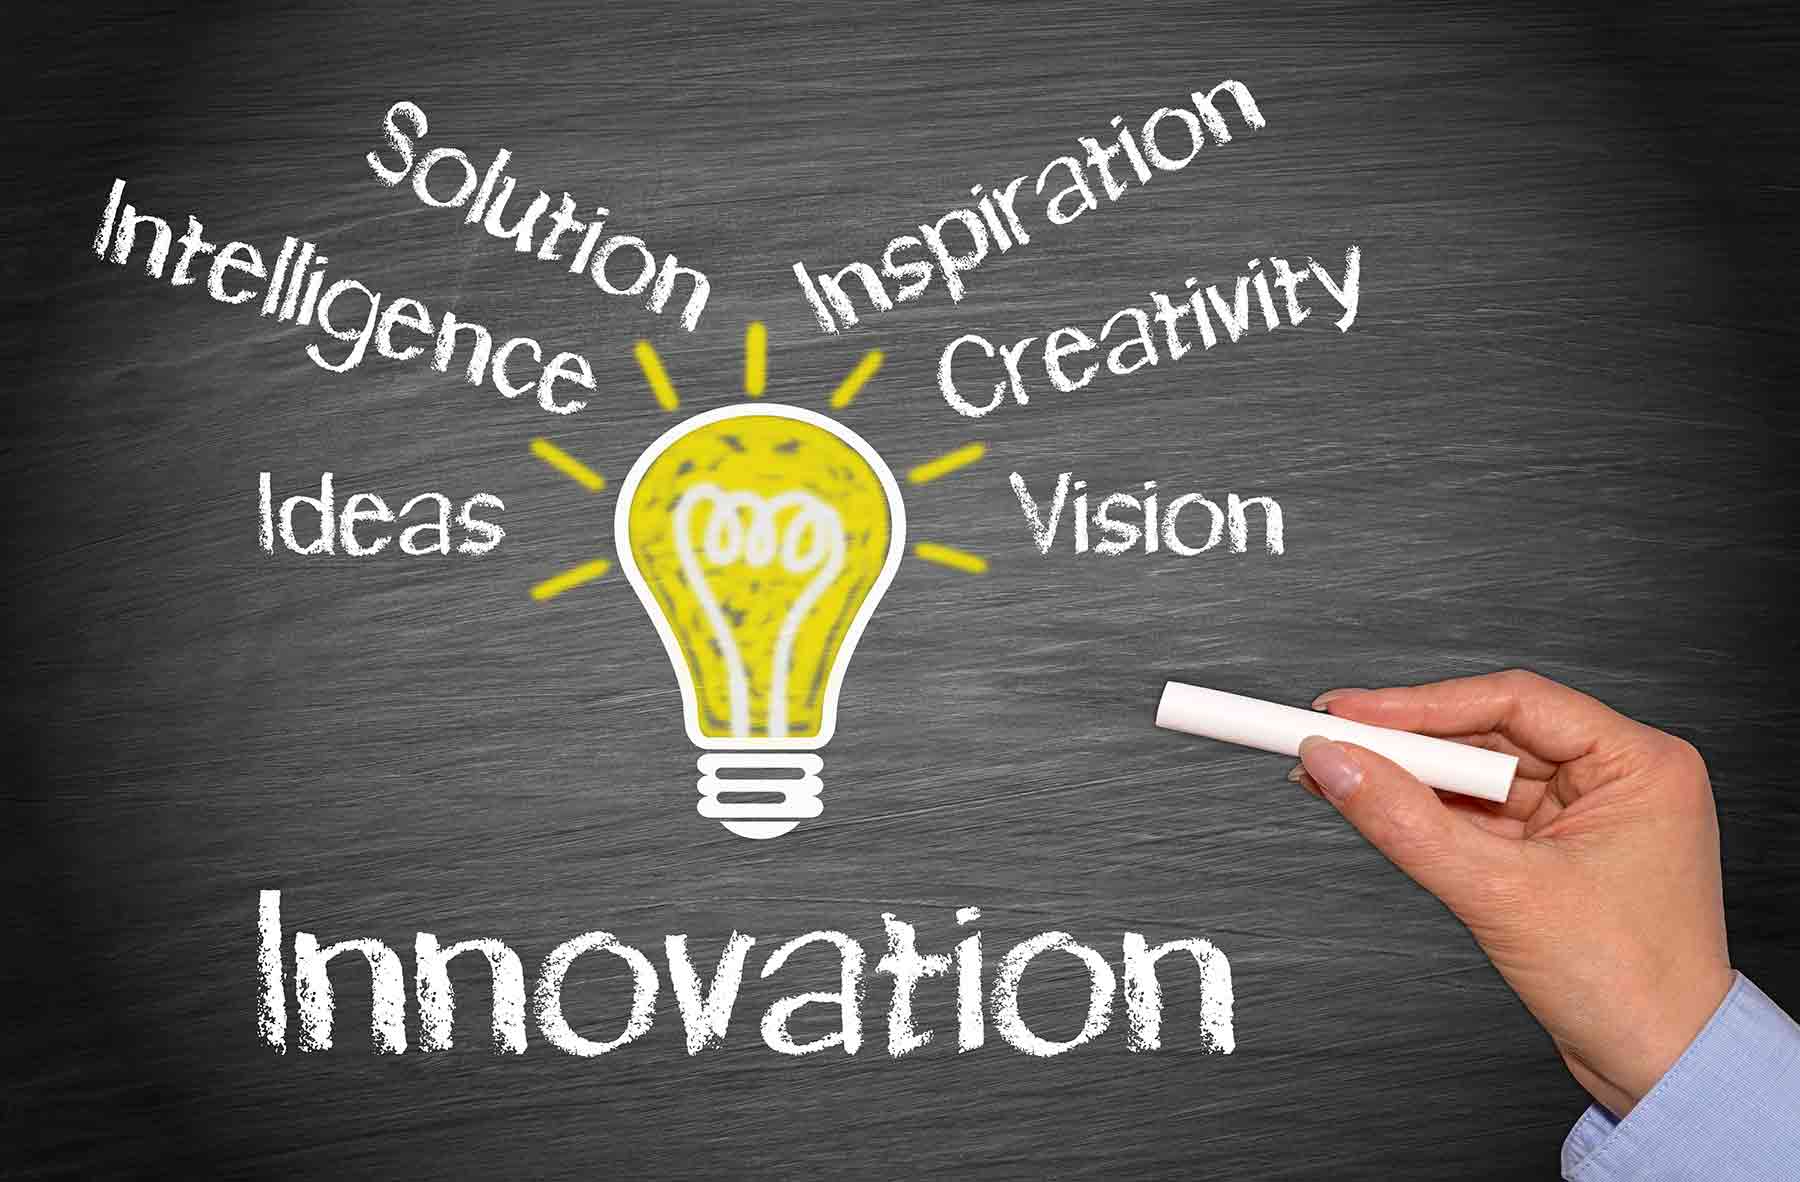 importance of strategic thinking and innovation in education